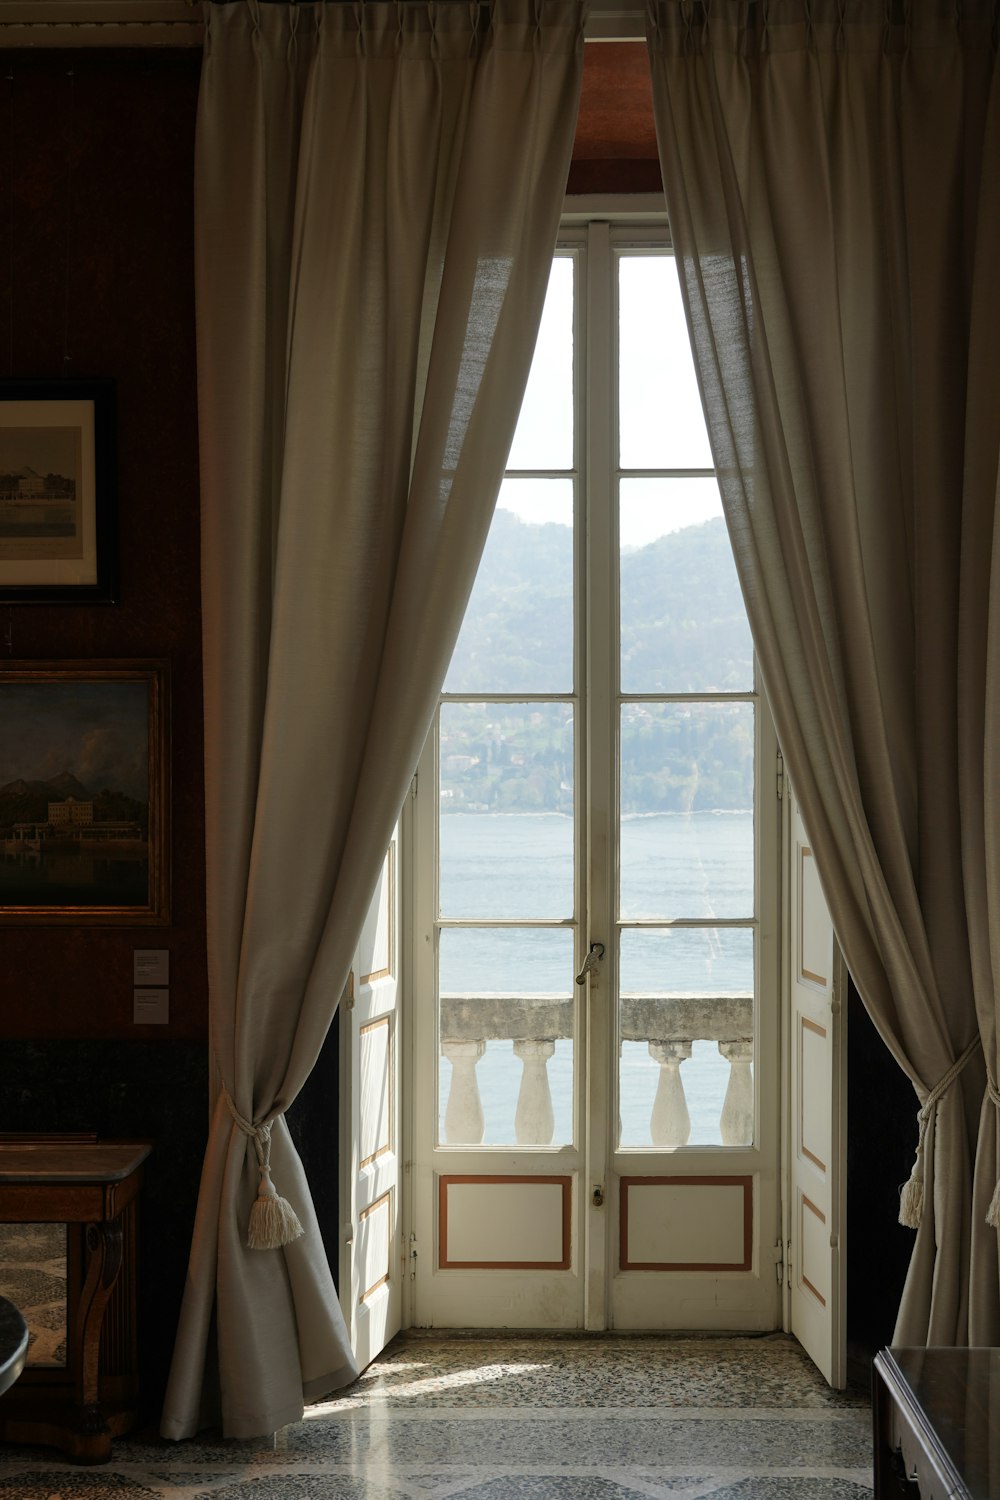 an open window with a view of a body of water